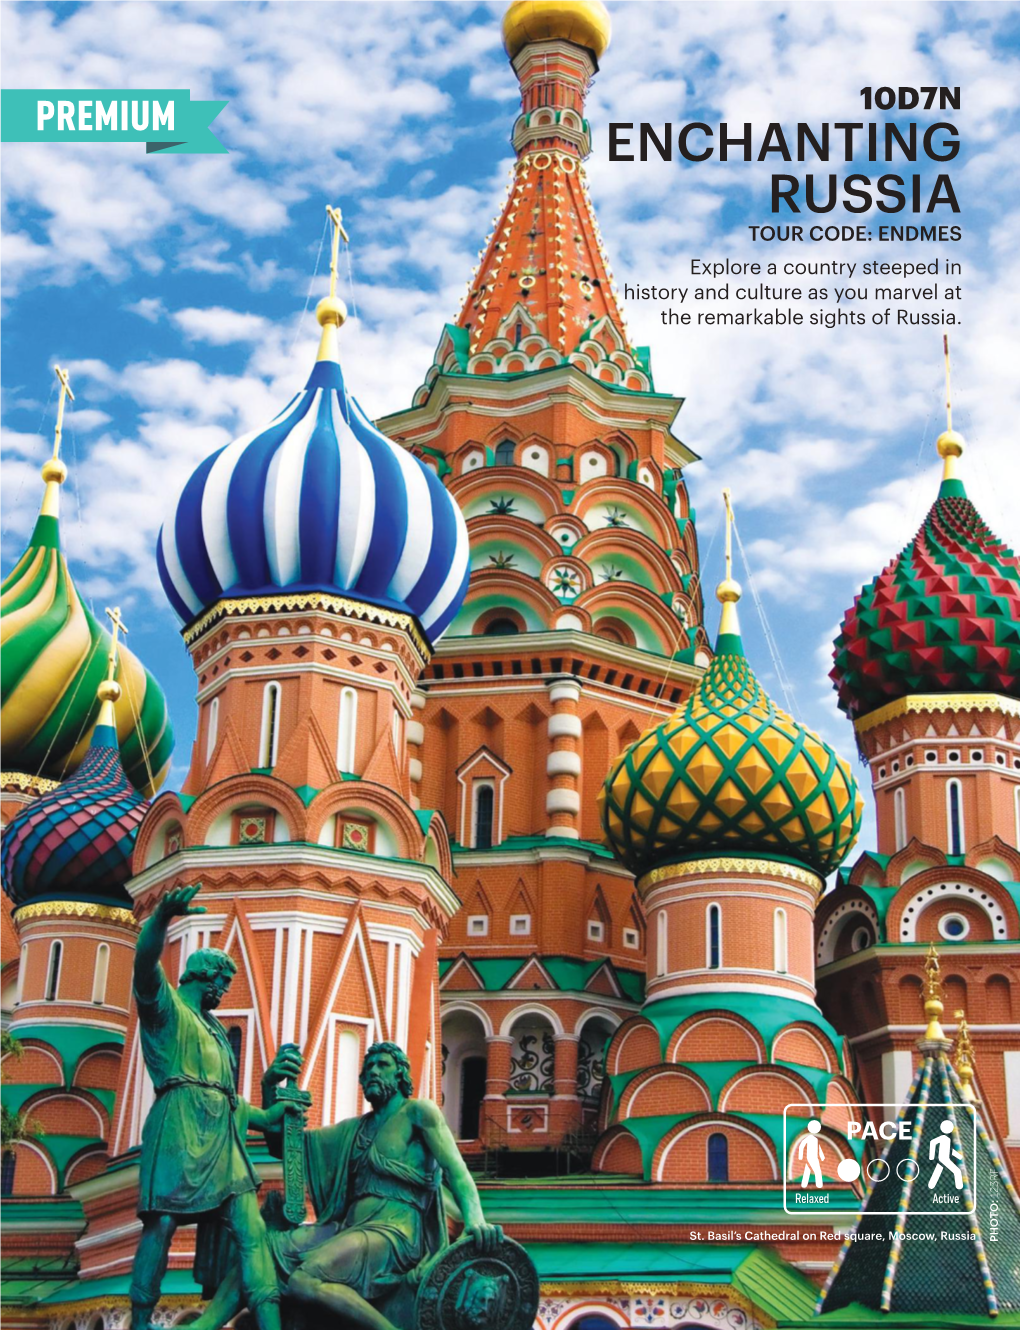 ENCHANTING RUSSIA TOUR CODE: ENDMES Explore a Country Steeped in History and Culture As You Marvel at the Remarkable Sights of Russia